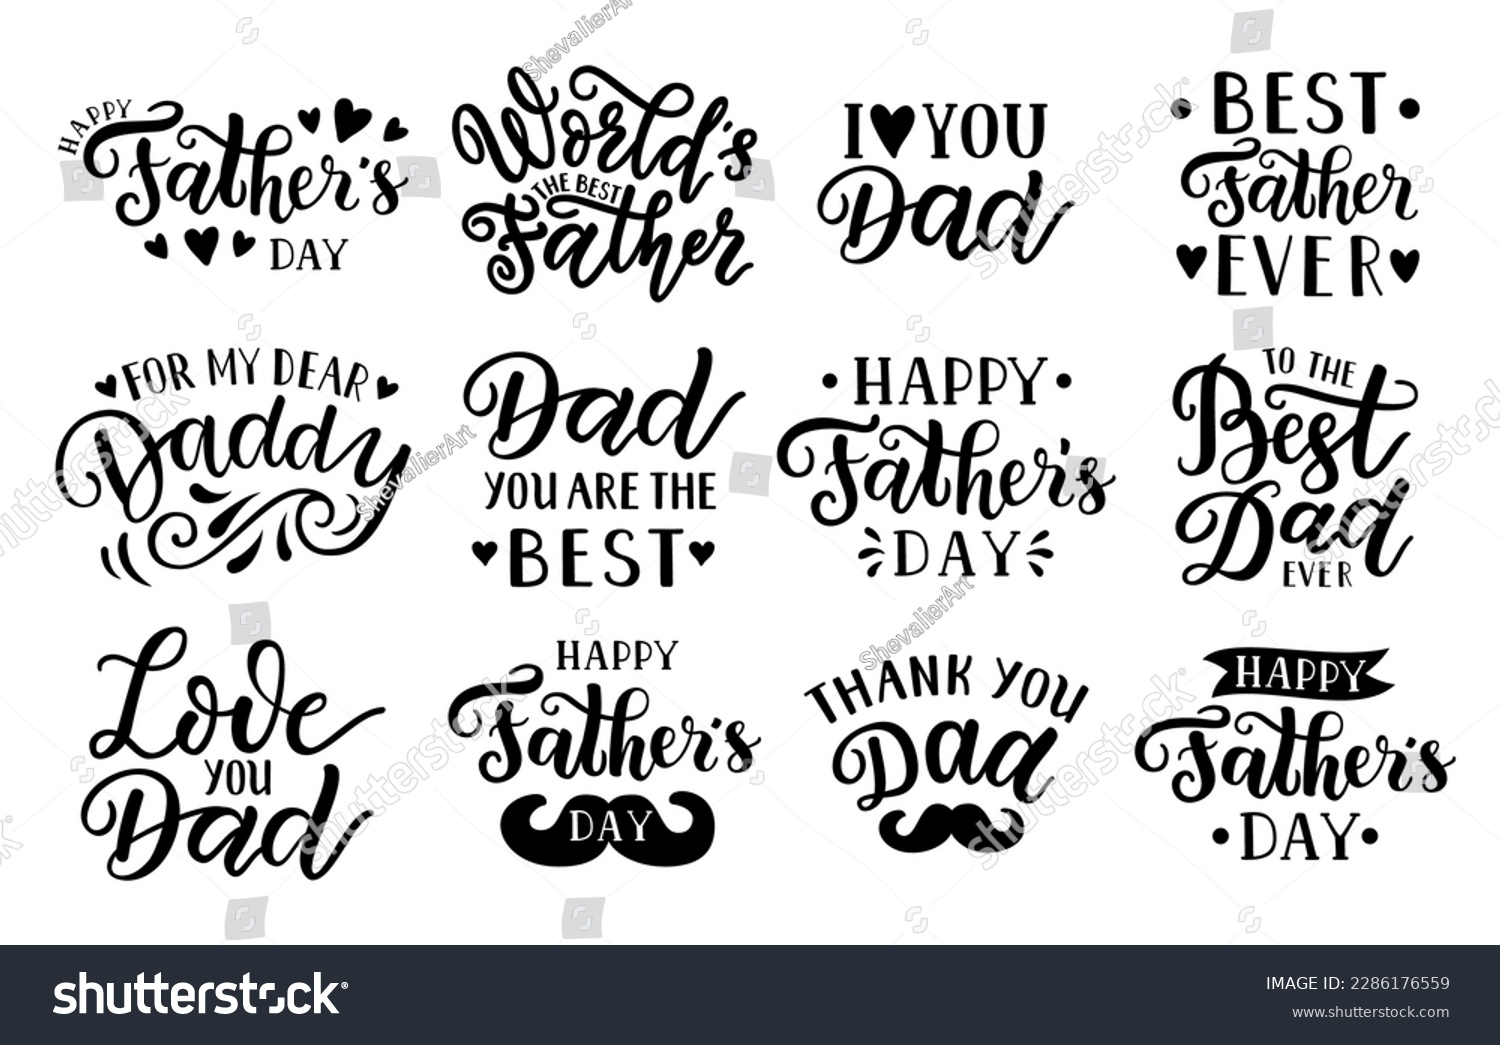 SVG of Happy Father's day, World's best dad, Thank you, Love you, For my dear daddy handdrawn lettering quotes. Handwritten decorative phrases. EPS 10 isolated vector illustration for prints, cutting designs svg